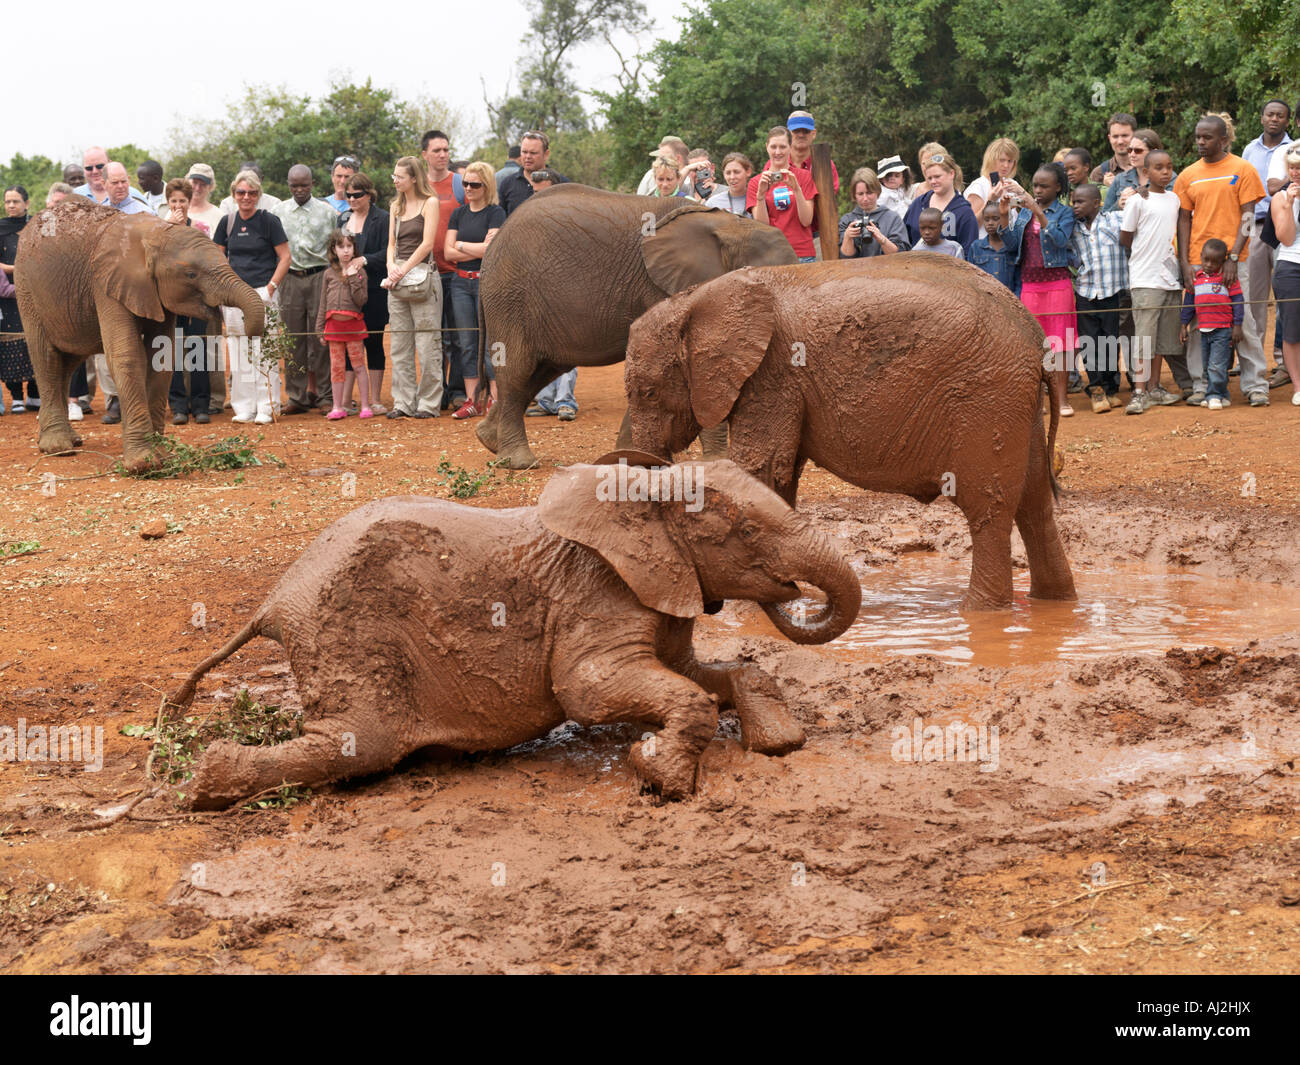 Visitors watch baby orphaned elephants play in a mudbath during the daily open hour at the Trust headquarters Stock Photo